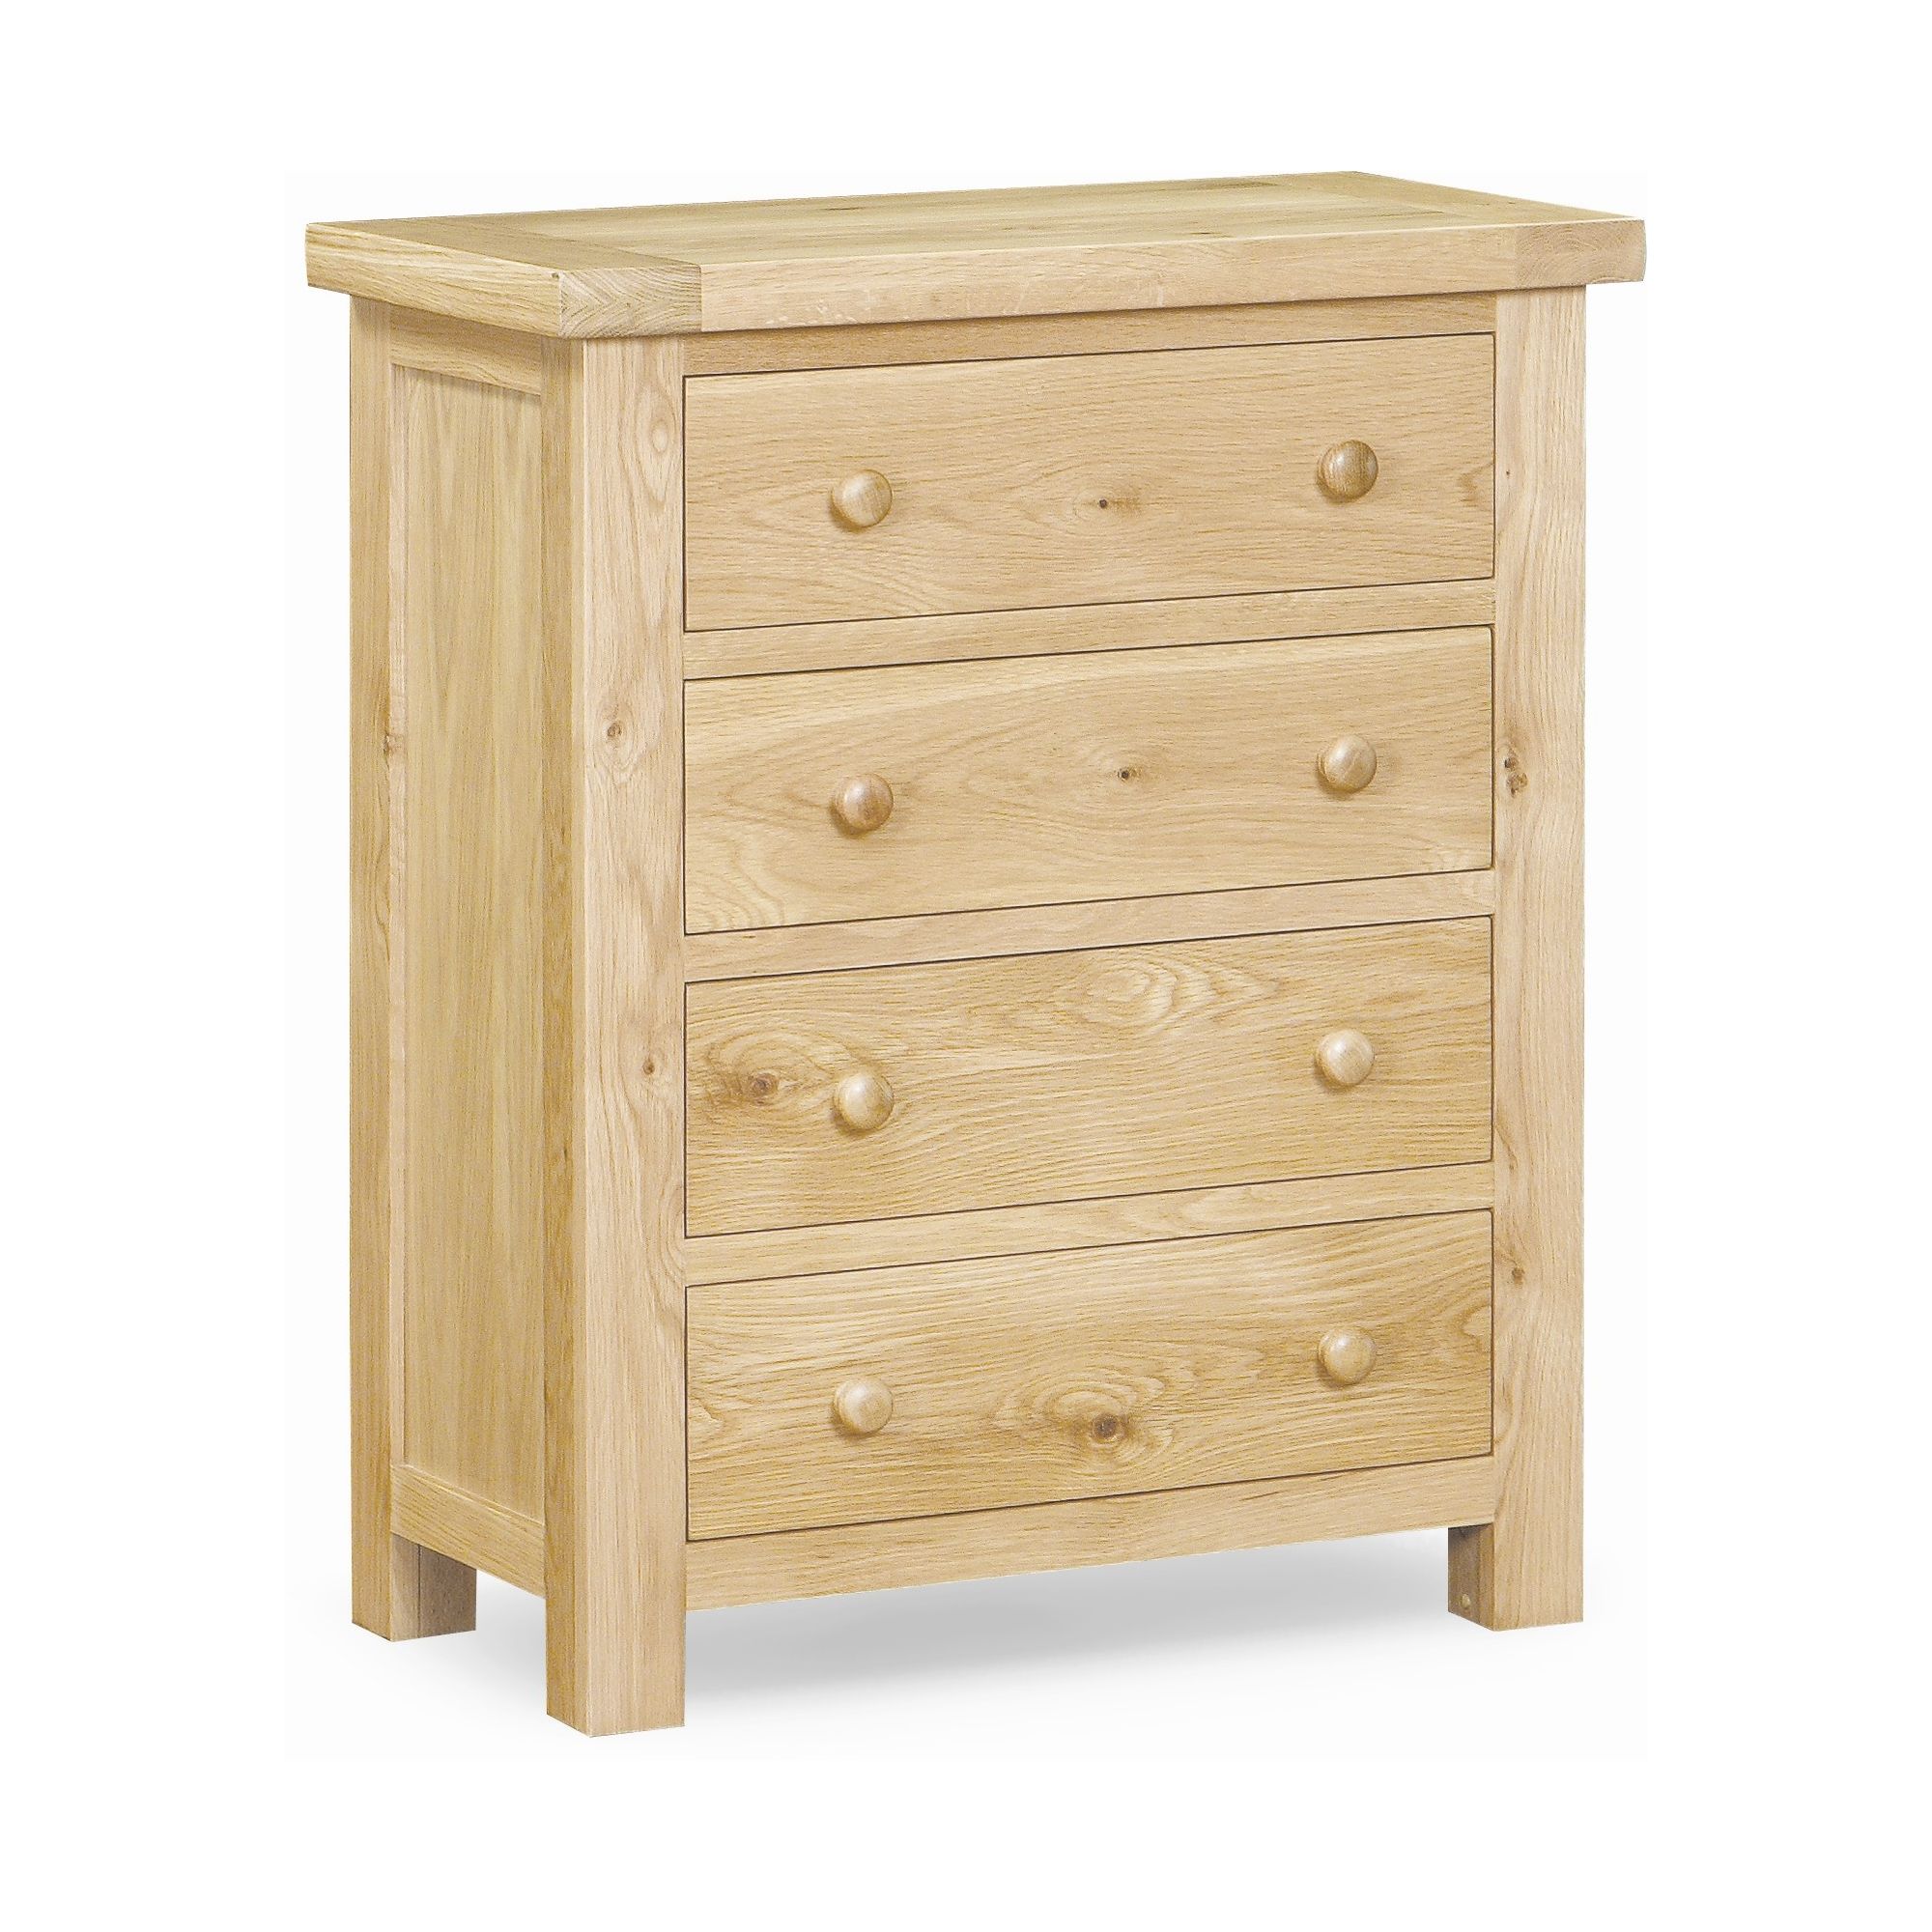 Alterton Furniture Chatsworth Drawer Chest at Tesco Direct